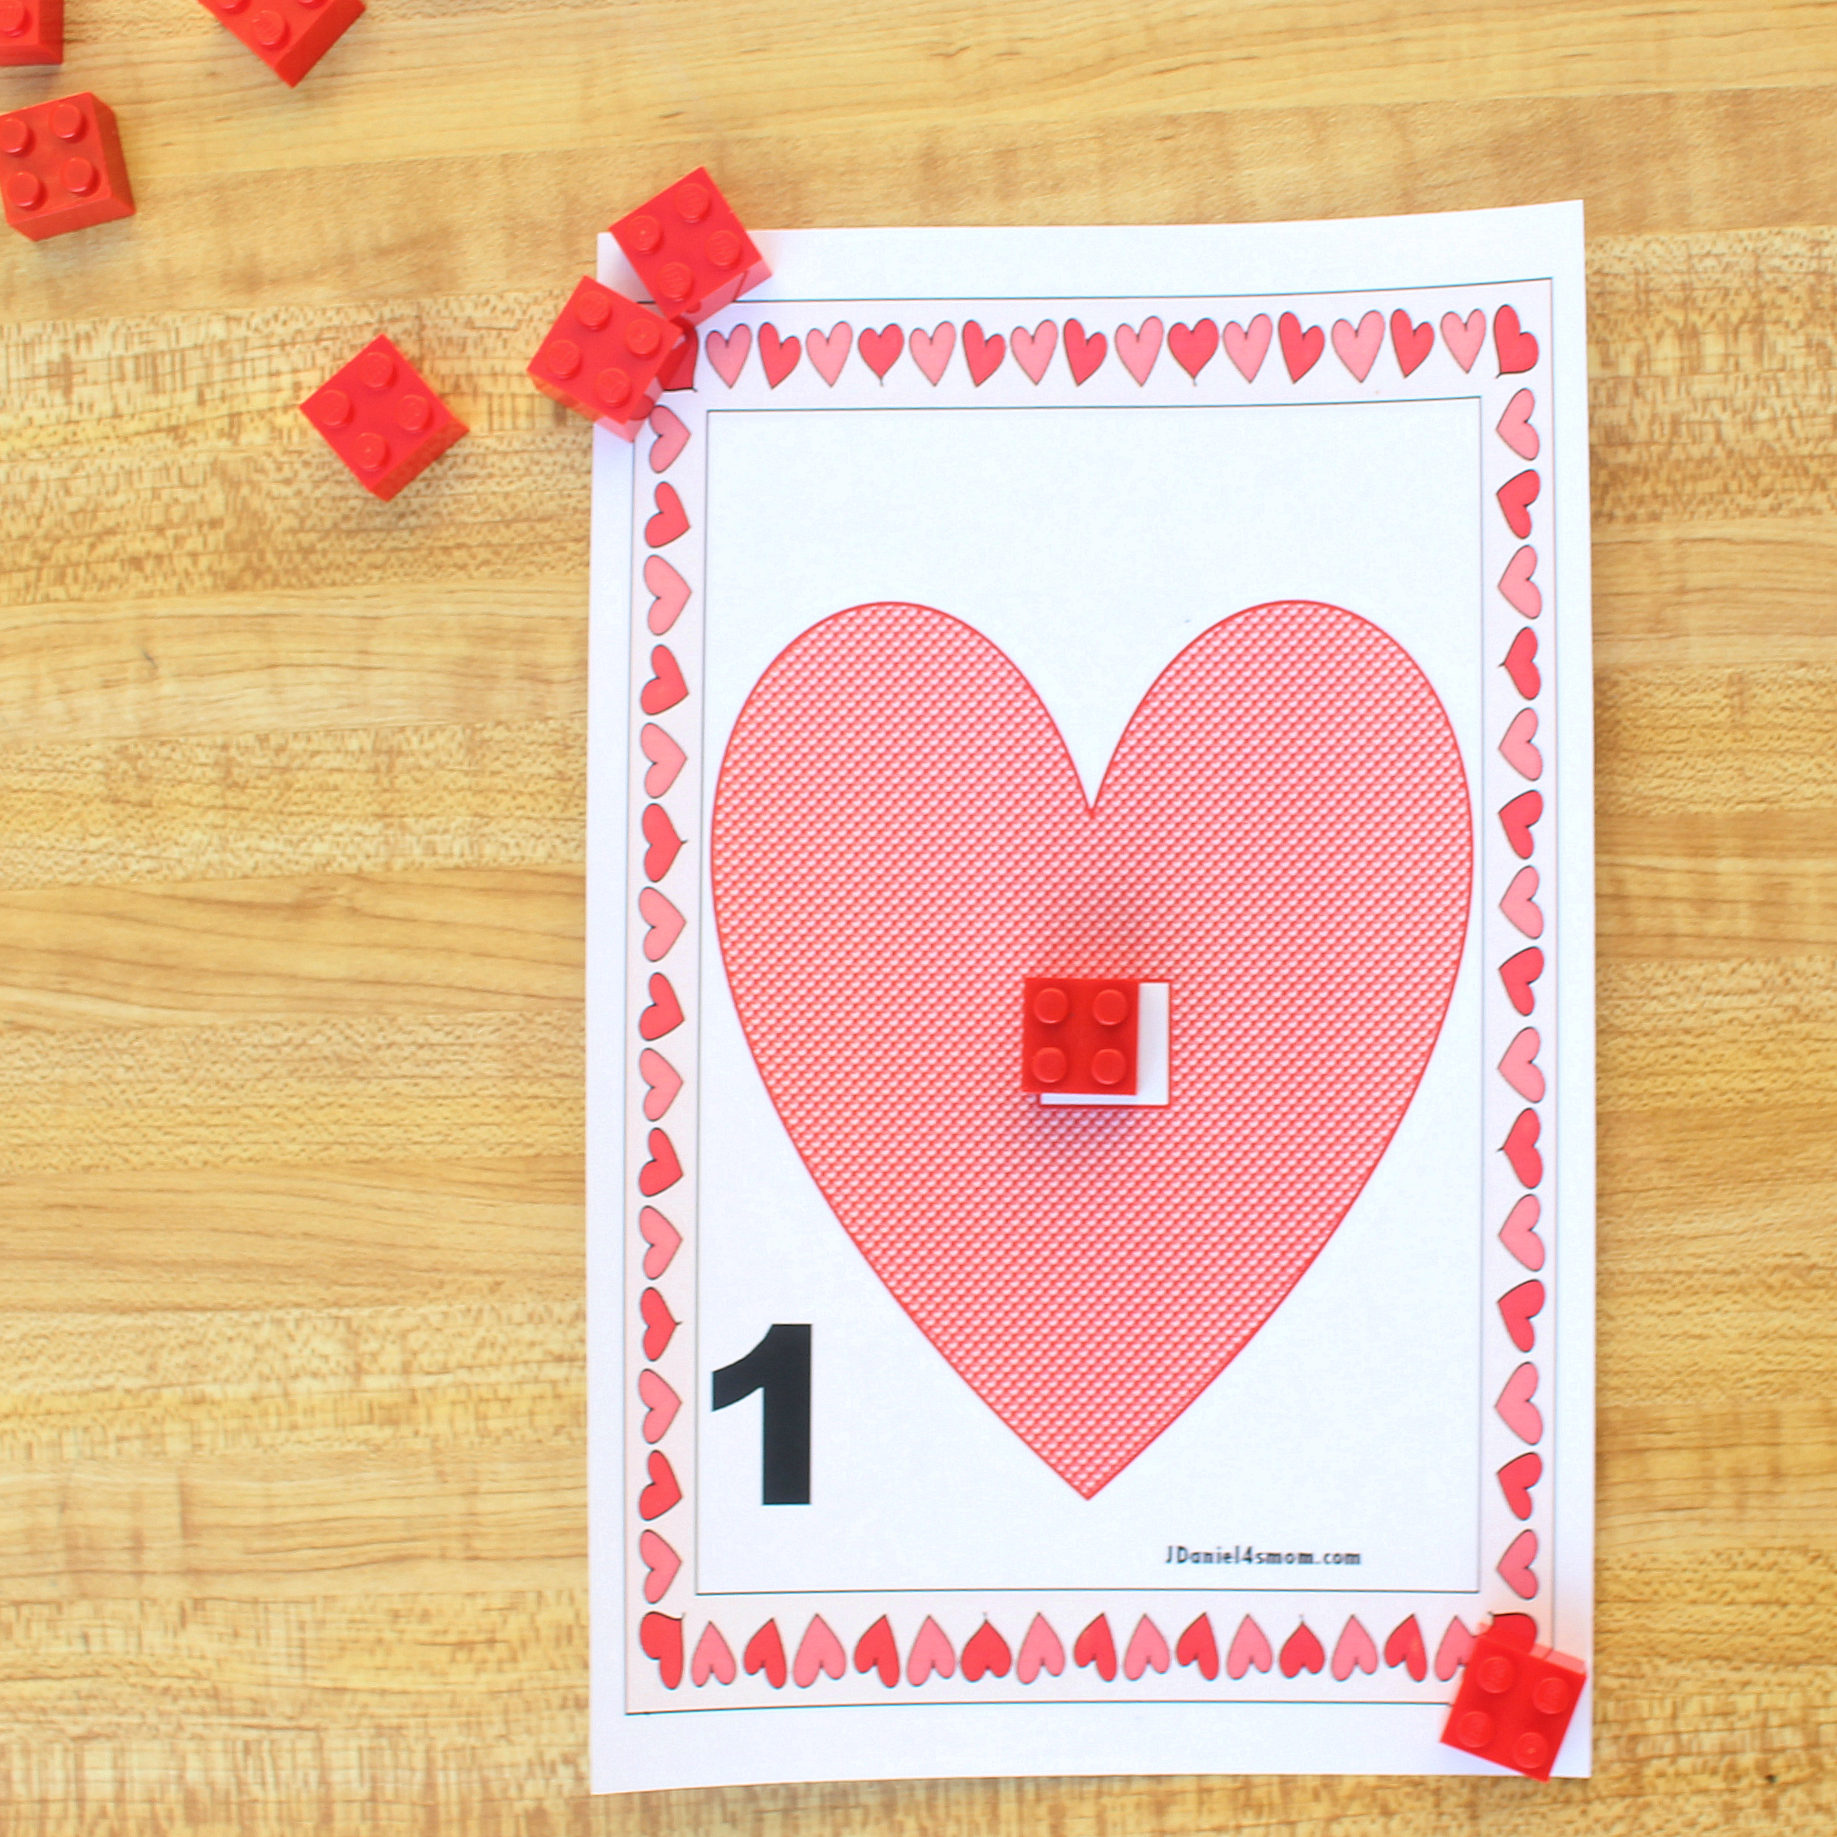 LEGO Math Valentine Counting Activity -Exploring the the Number One